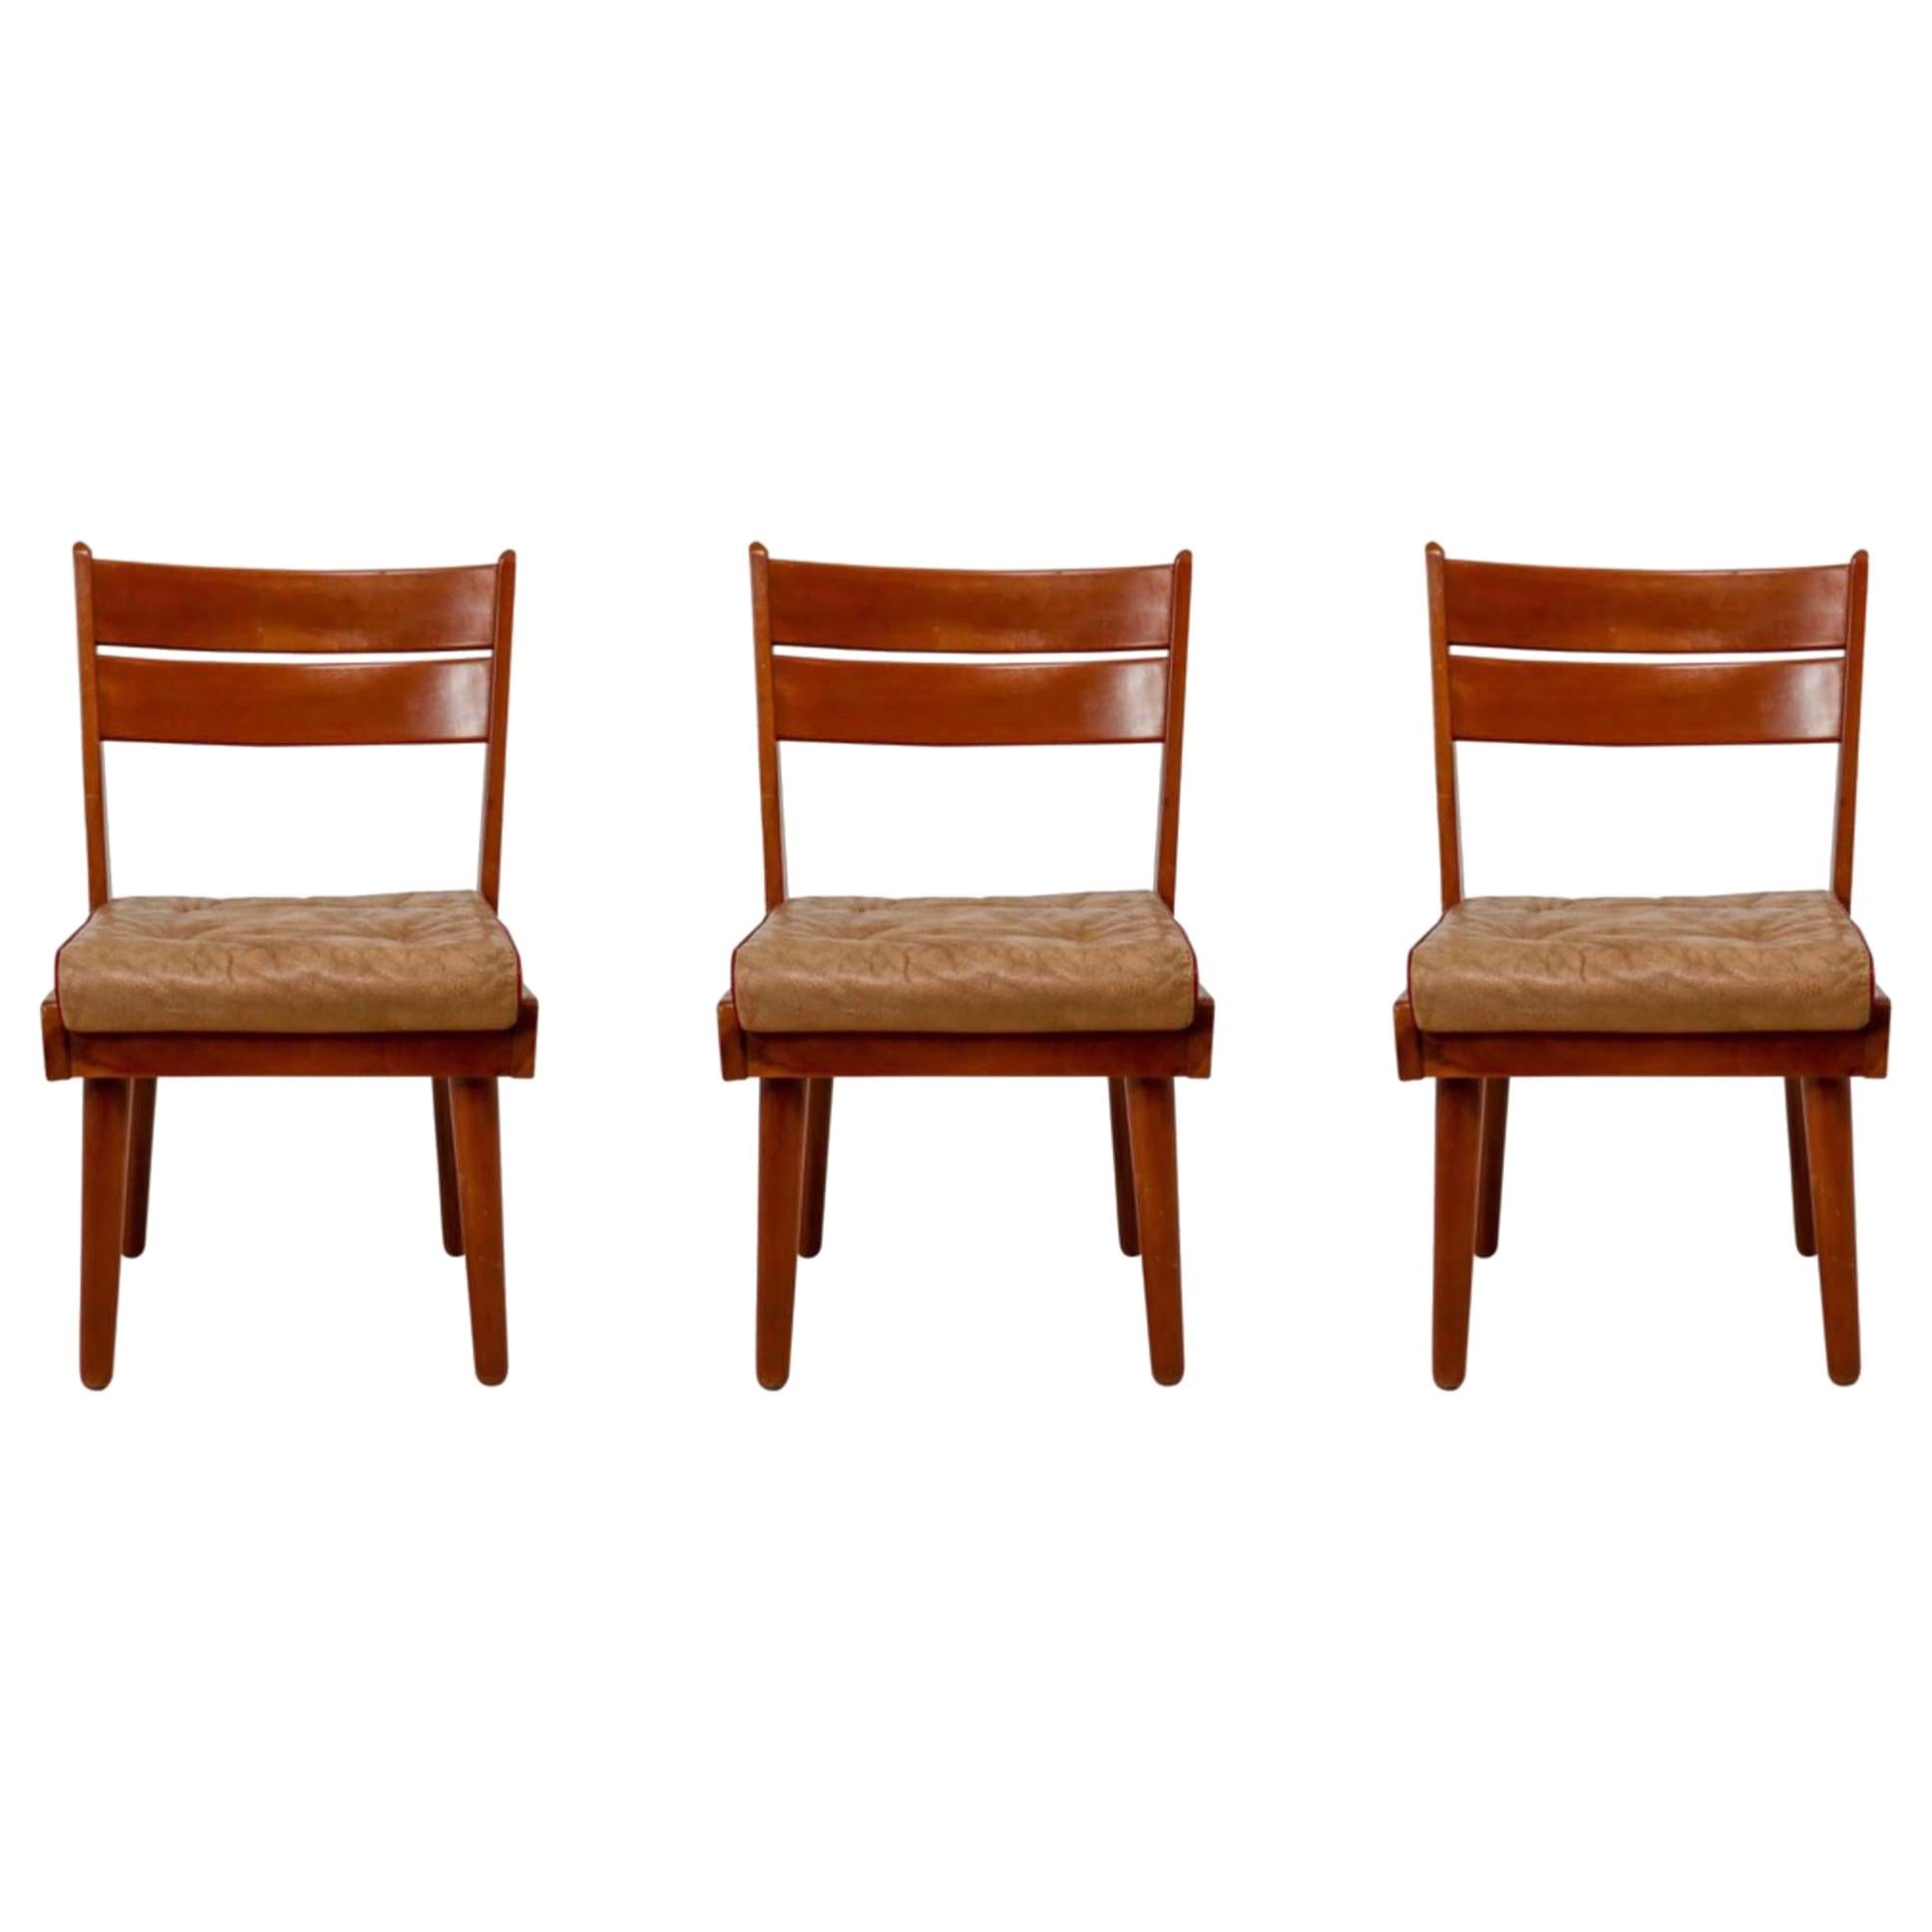 Midcentury Chairs in Walnut and Leather, Austria, 1950s